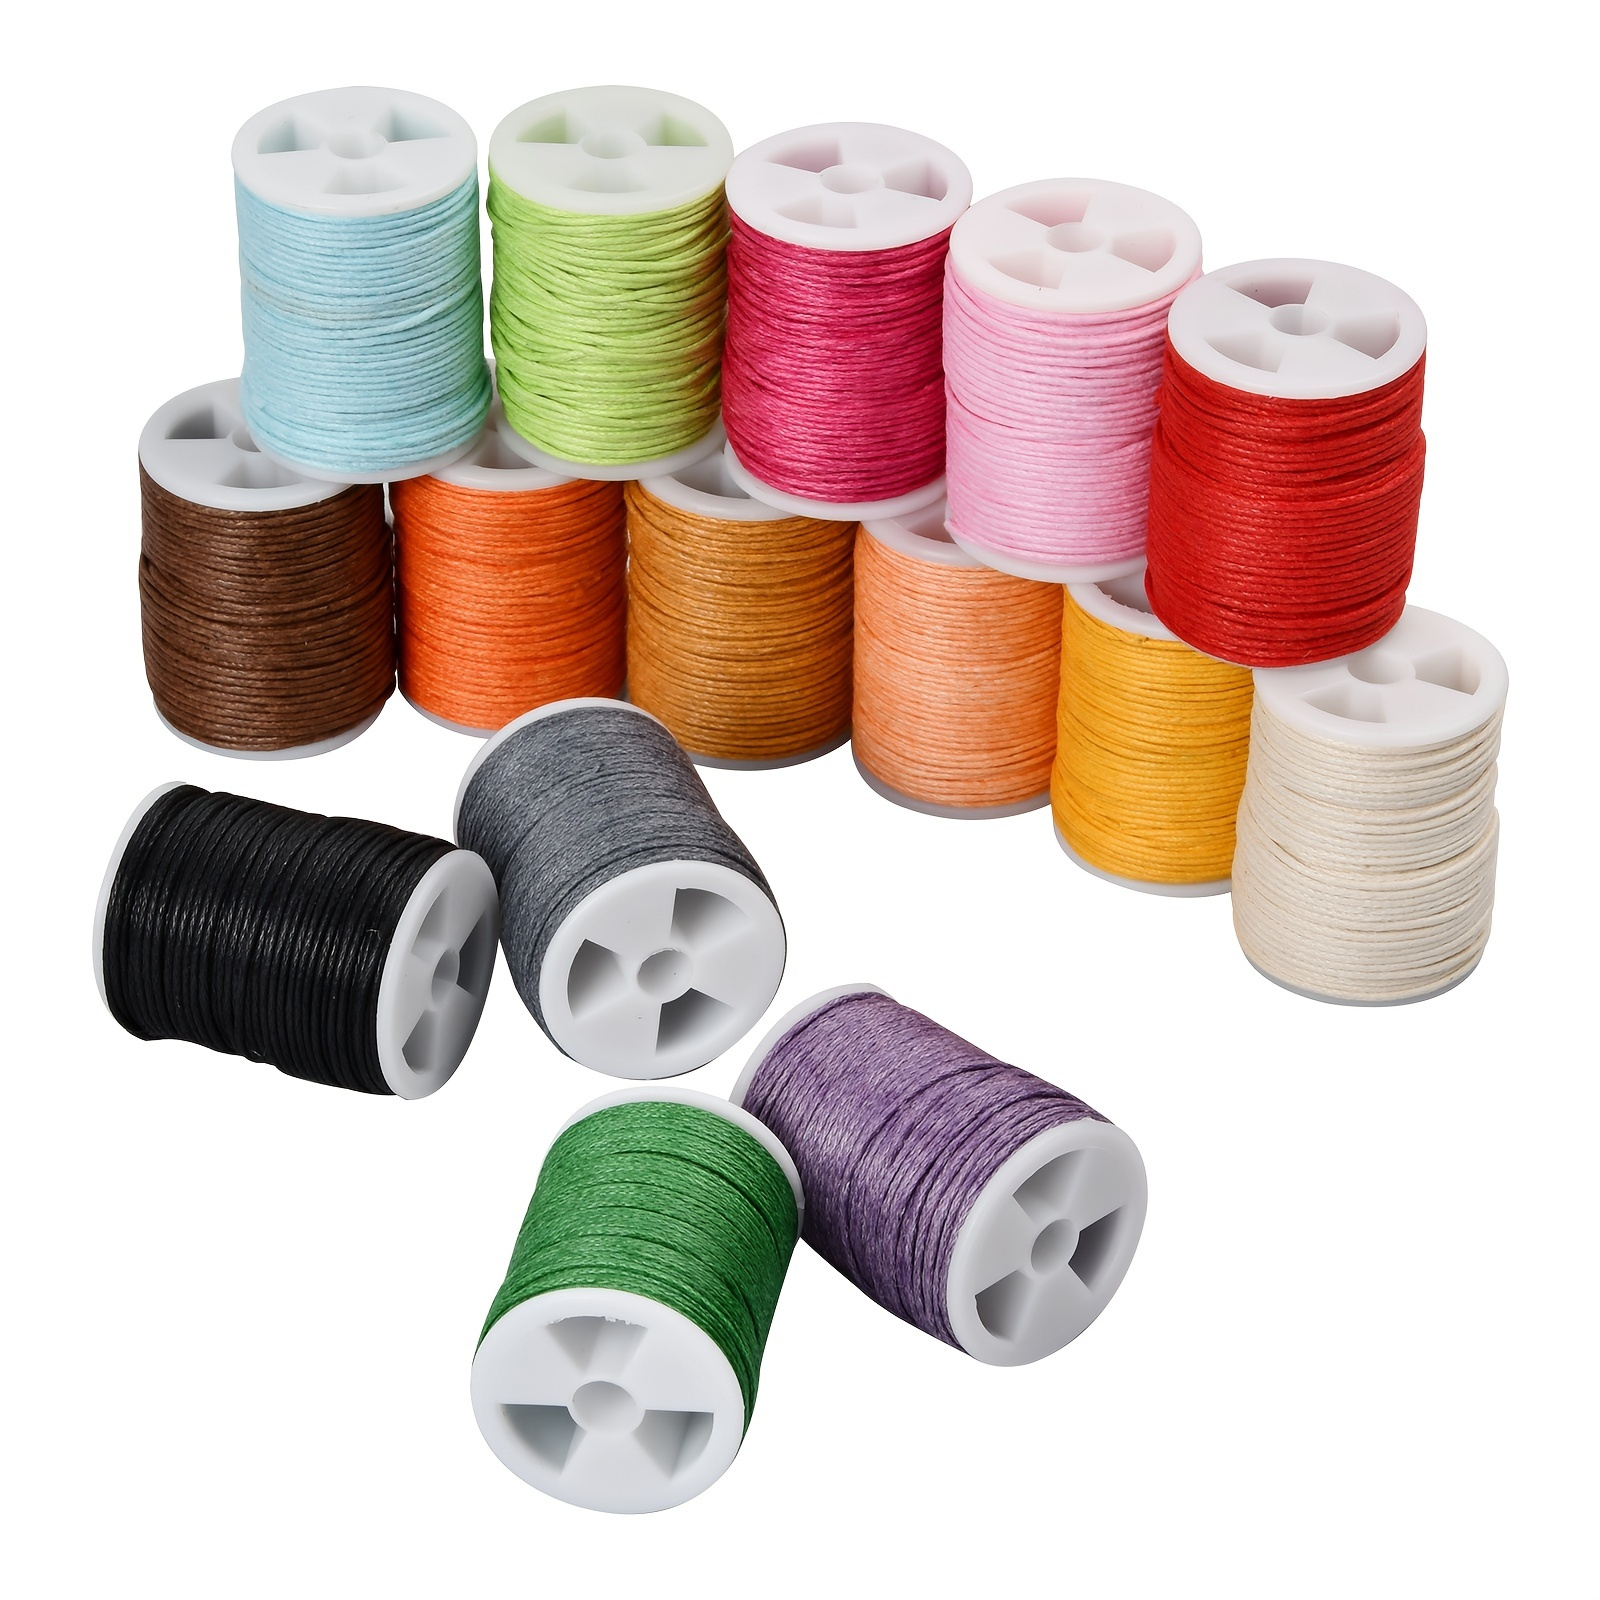 

15 Rolls 1mmx10 M Waxed Cord Round Wax Thread Cord Colourful Wax Yarn Bead Cord Cable For Diy Craft Necklace